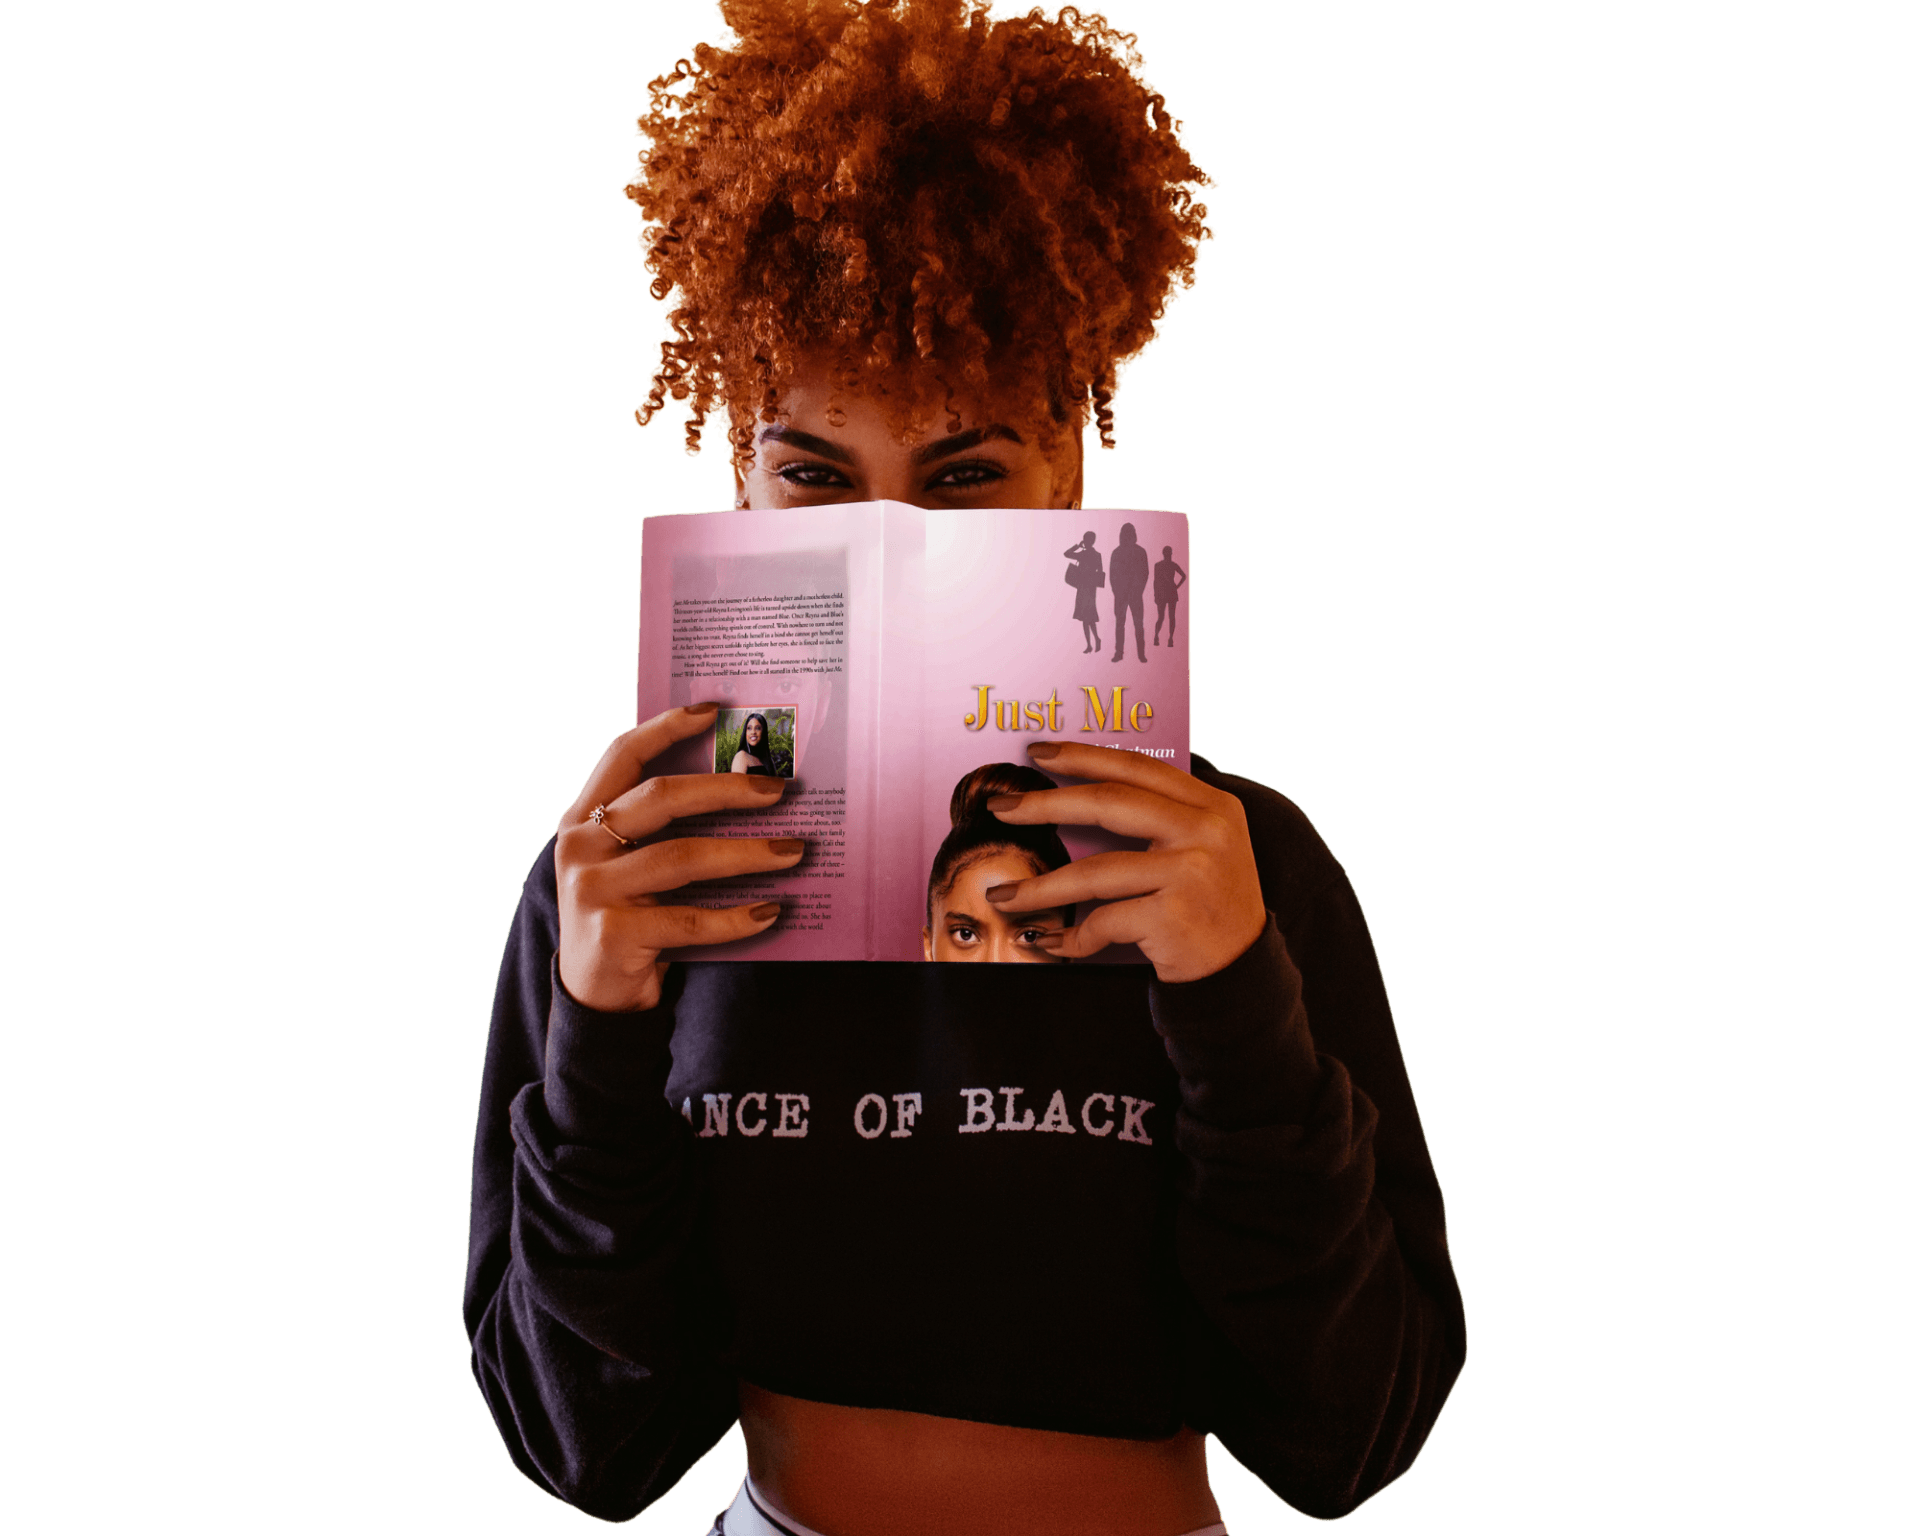 A woman wearing a sweater that says ice of black is reading a book